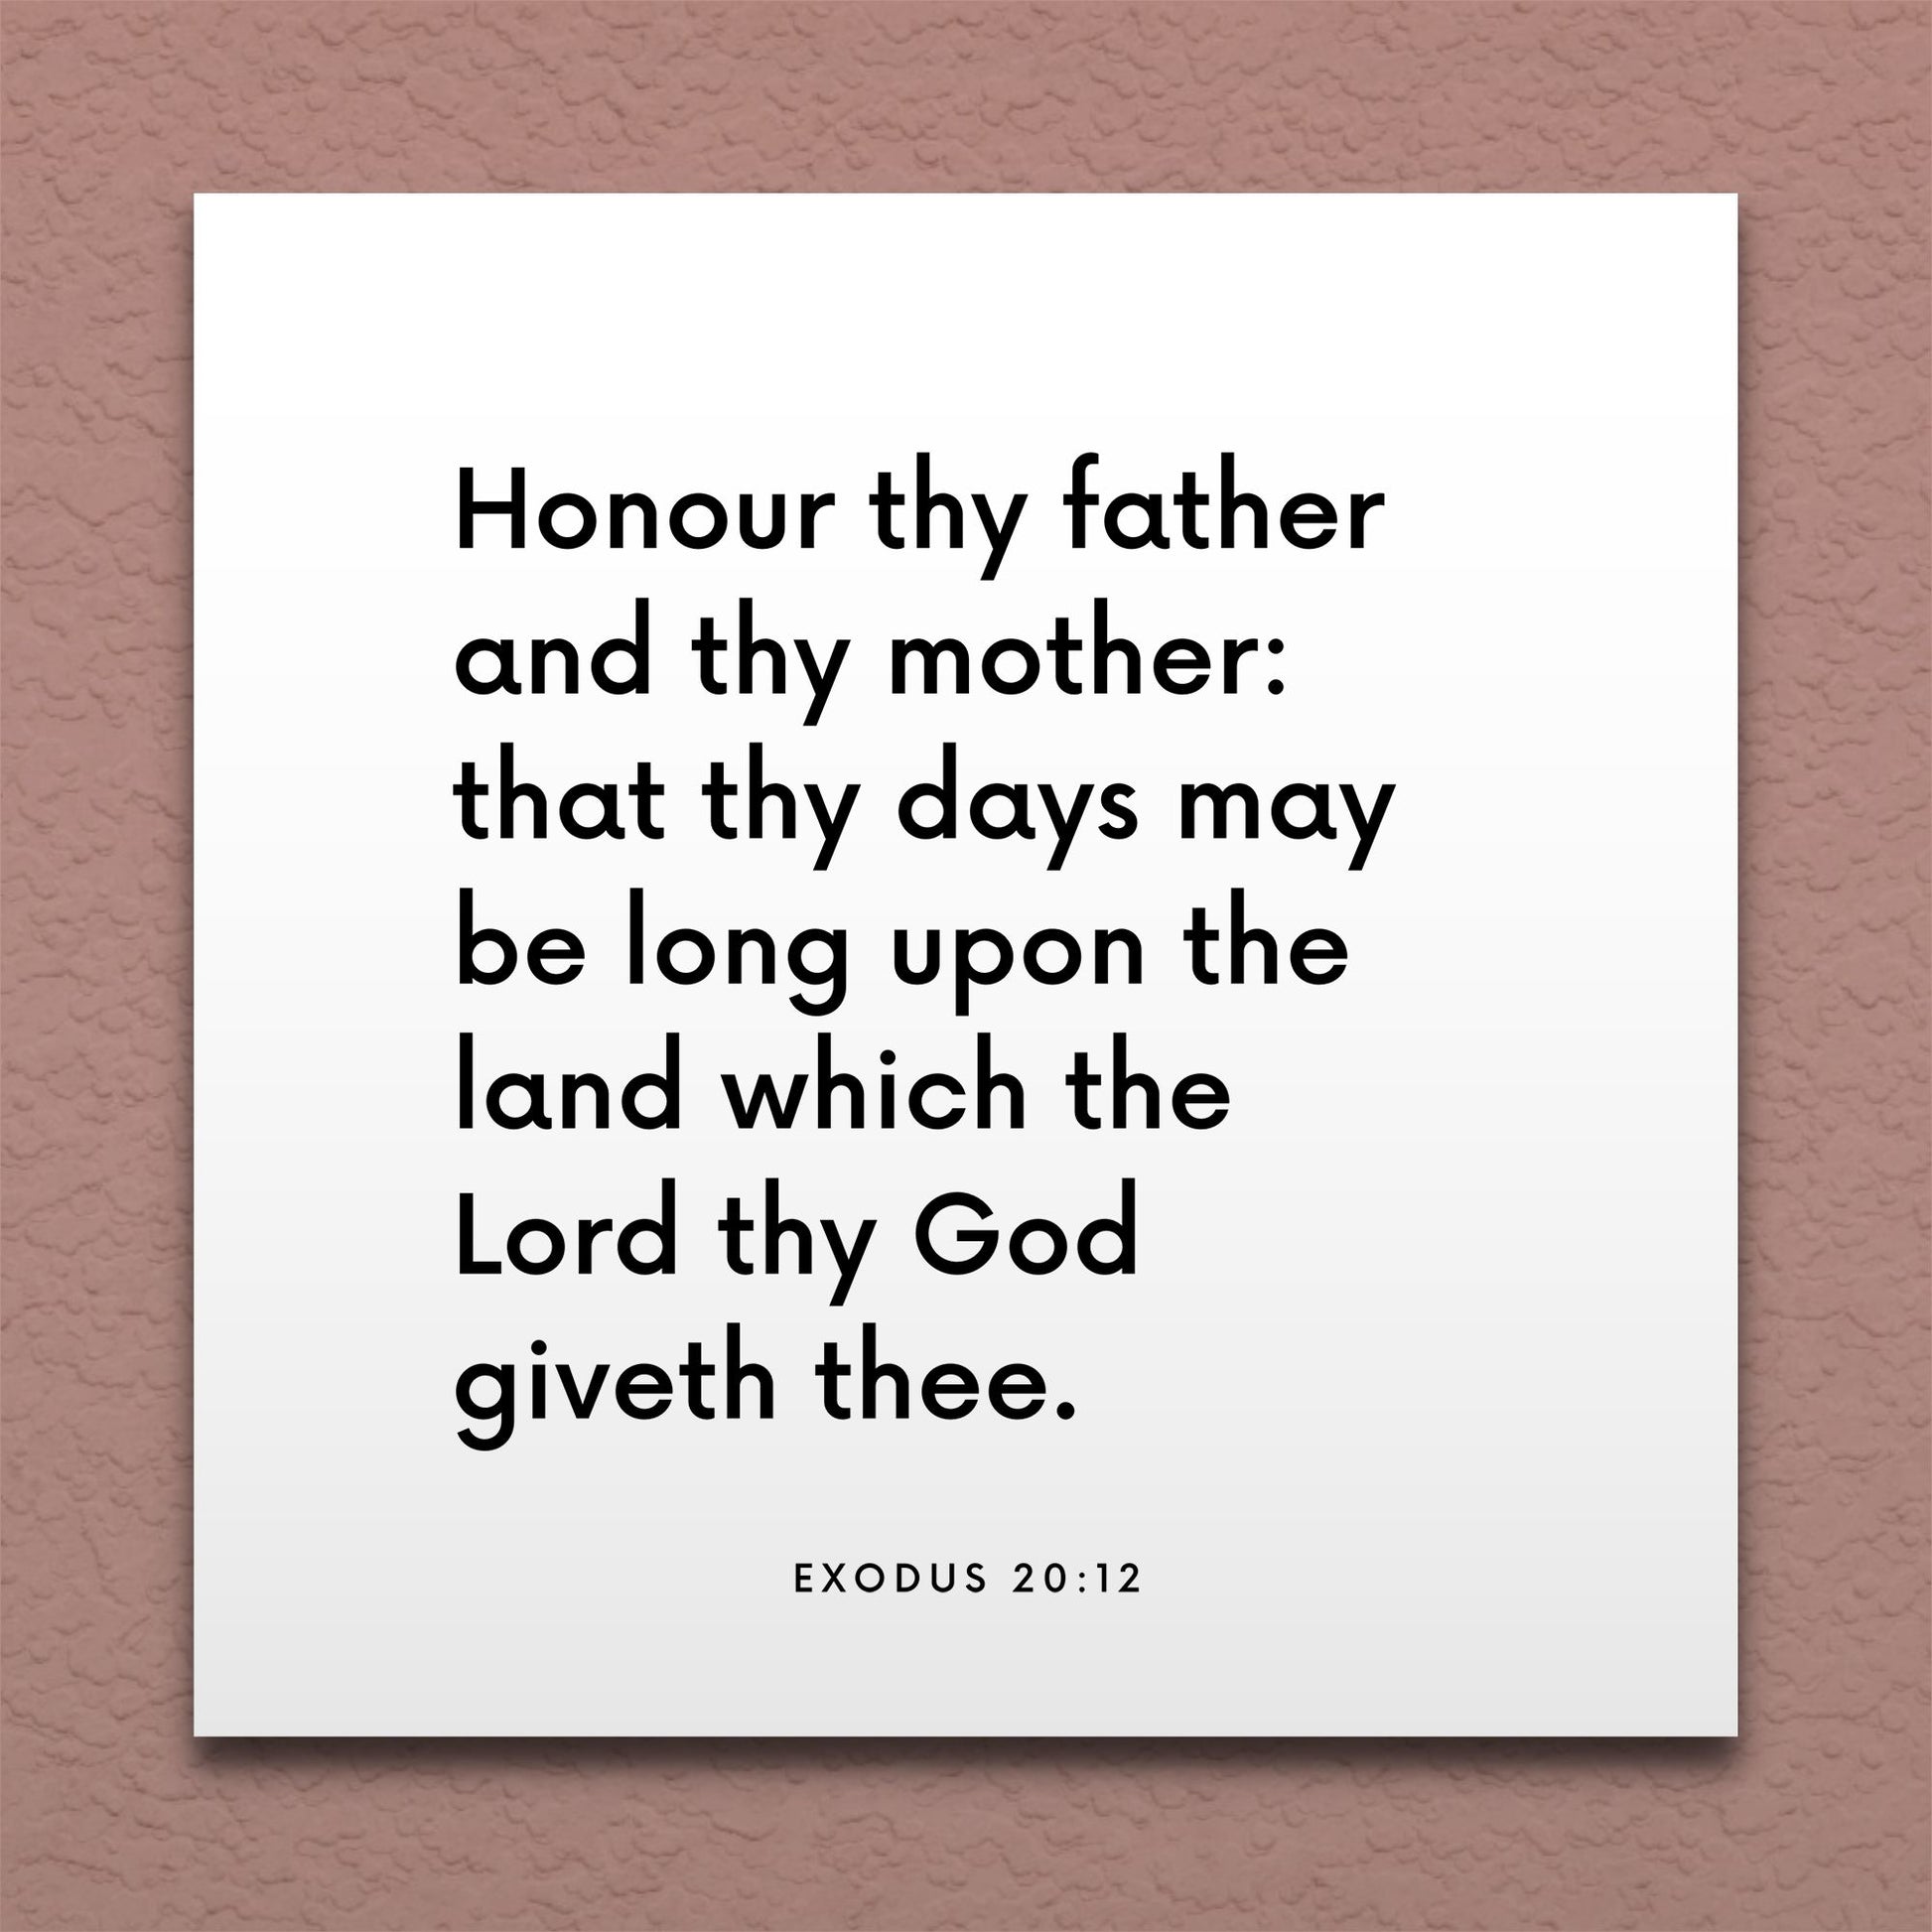 Wall-mounted scripture tile for Exodus 20:12 - "Honour thy father and thy mother"